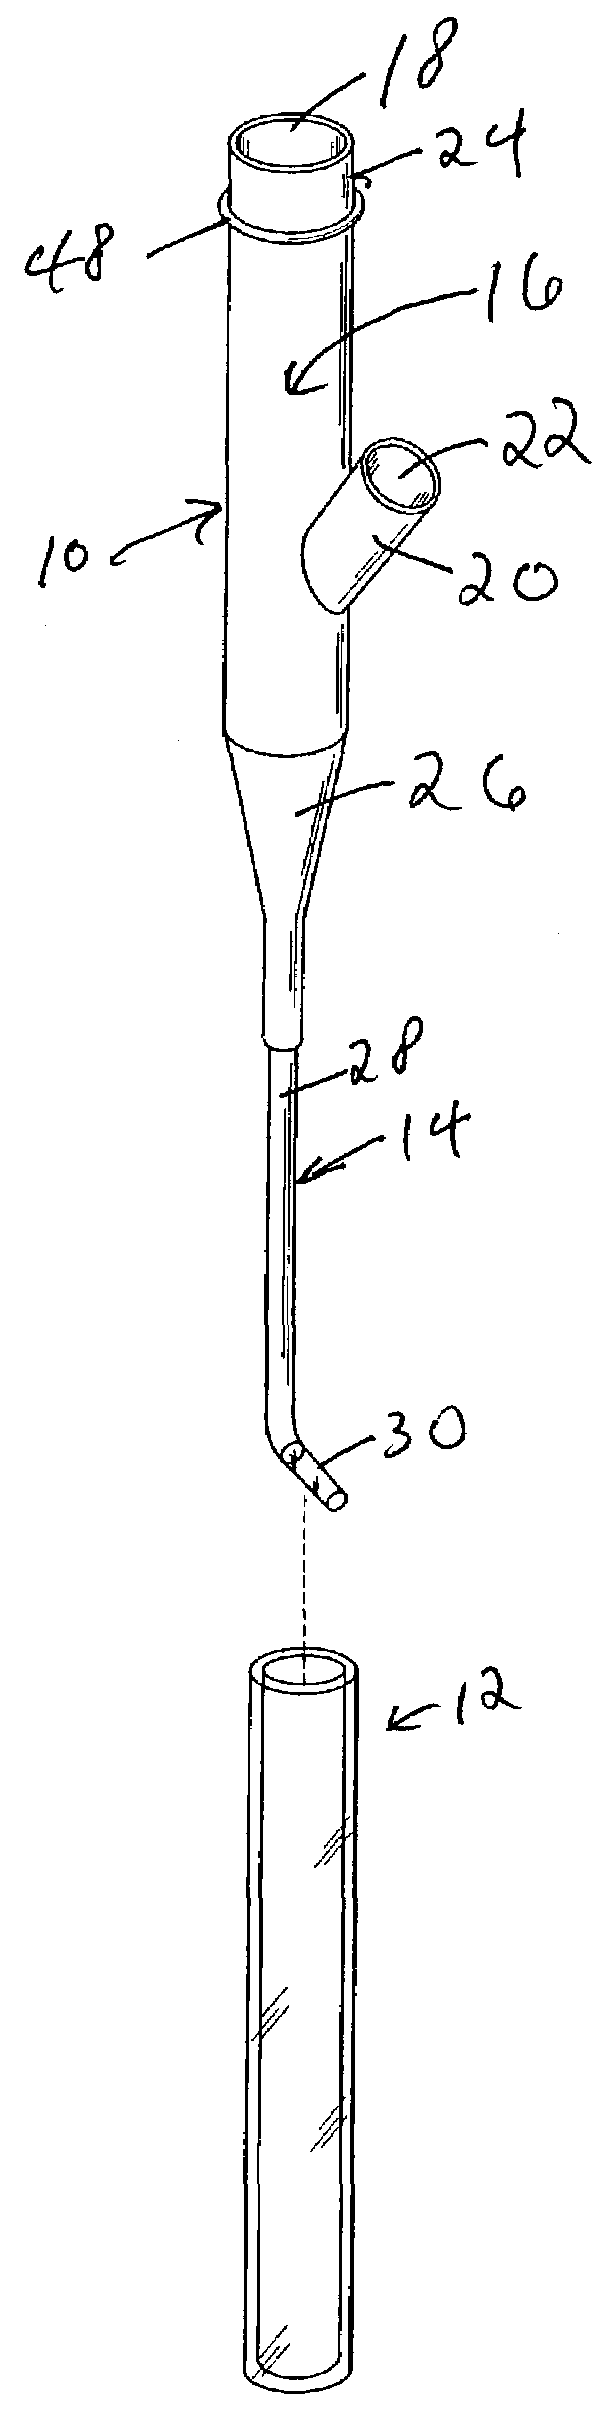 Subretinal implantation device and surgical cannulas for use therewith